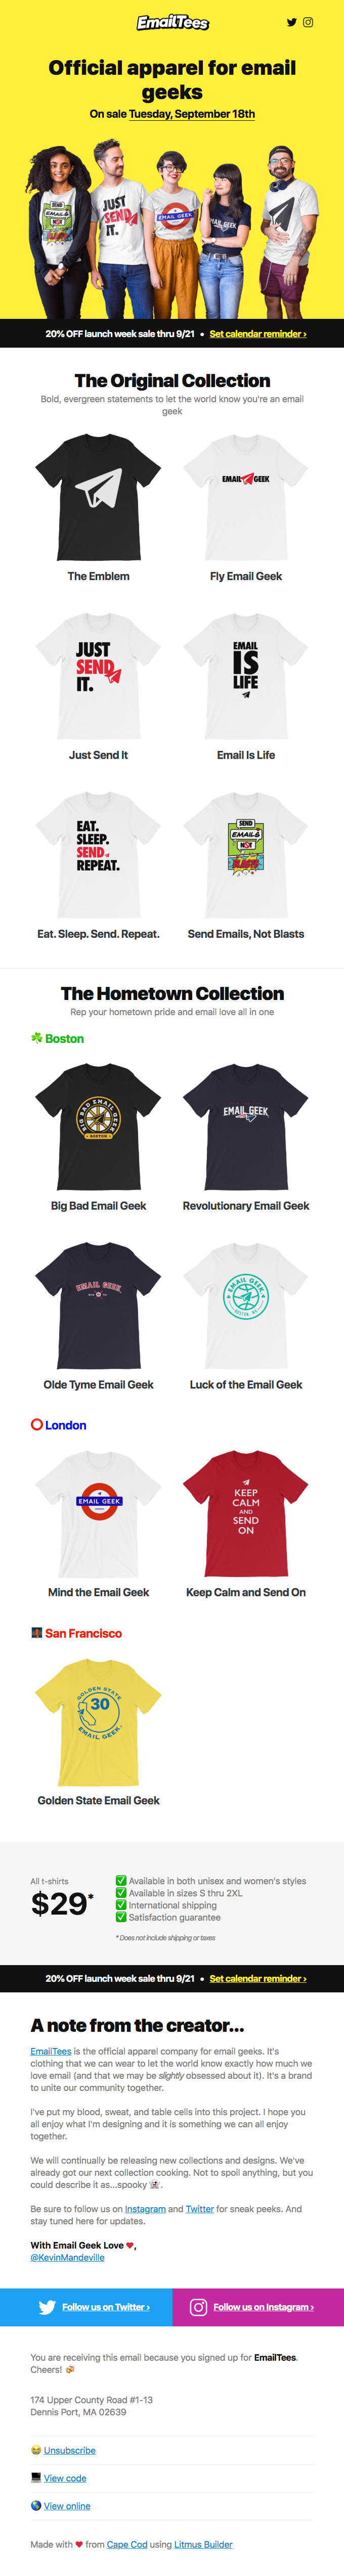 EmailTees Debut Newsletter